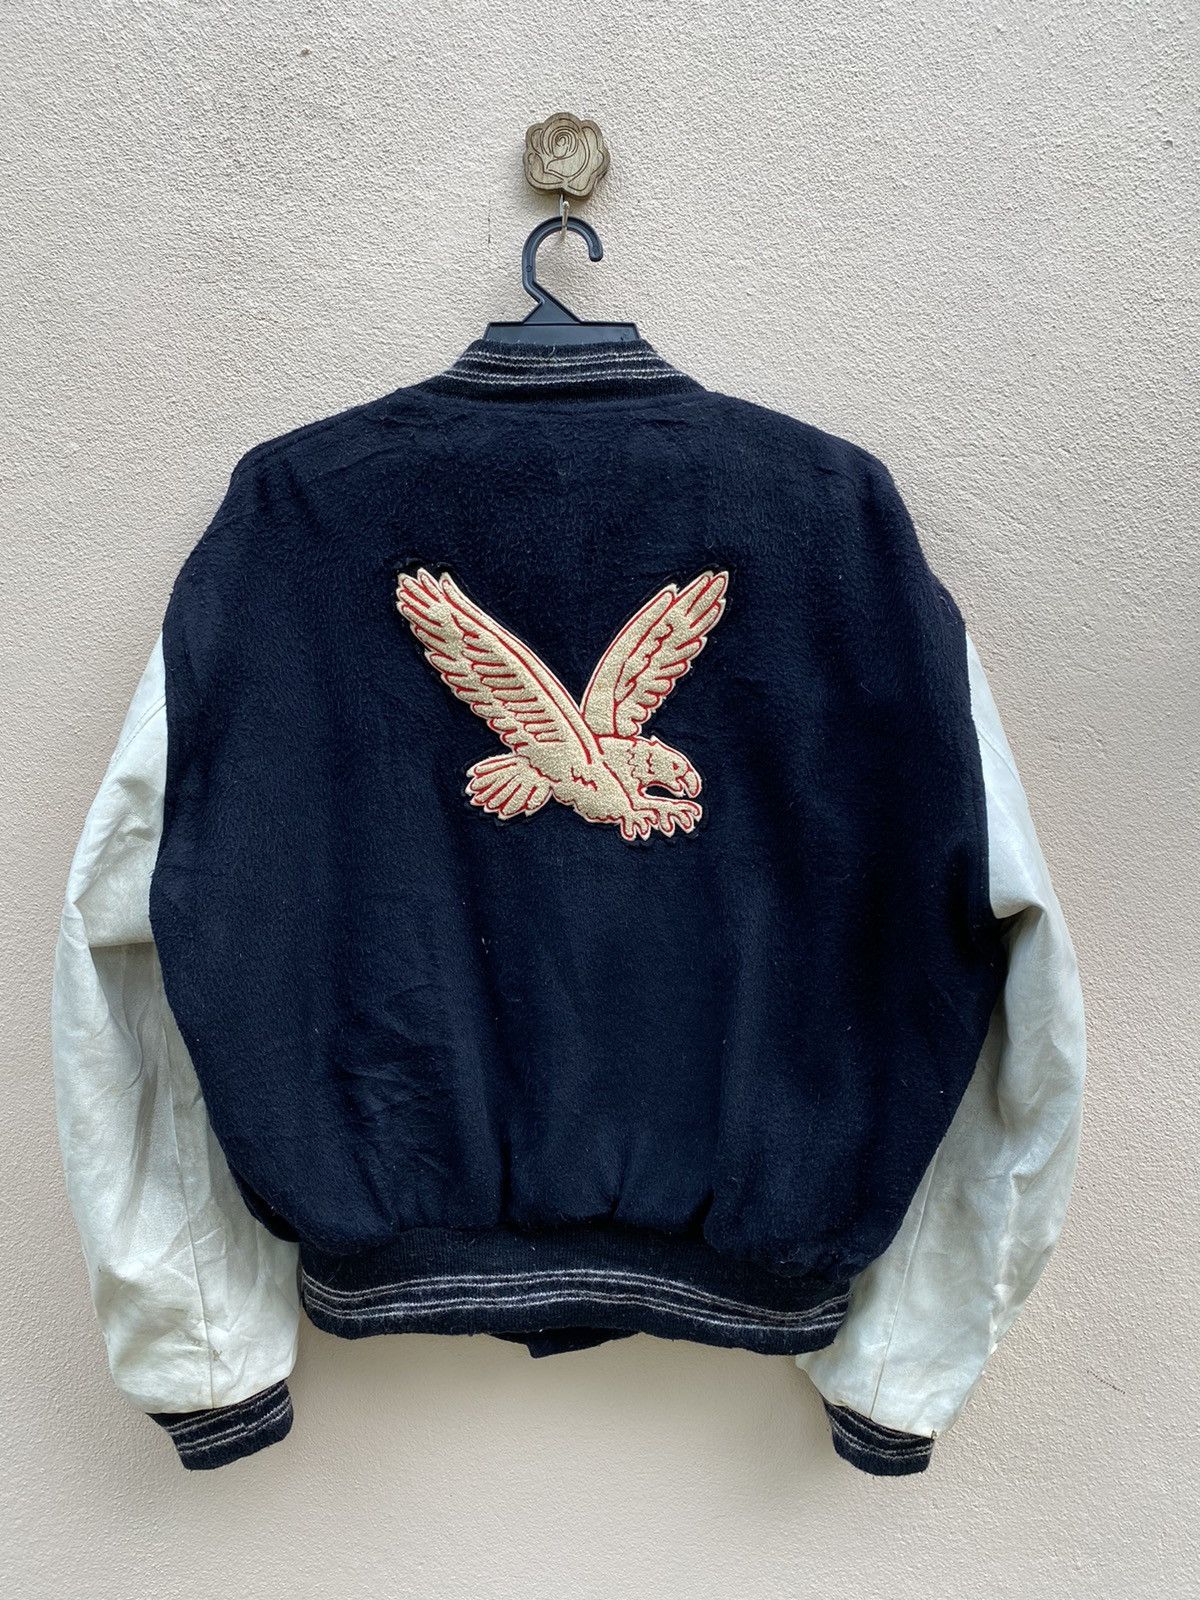 Vintage RARE 1970s BUTWIN THE JACKET FOR CHAMPION Varsity Jacket Size US M / EU 48-50 / 2 - 1 Preview